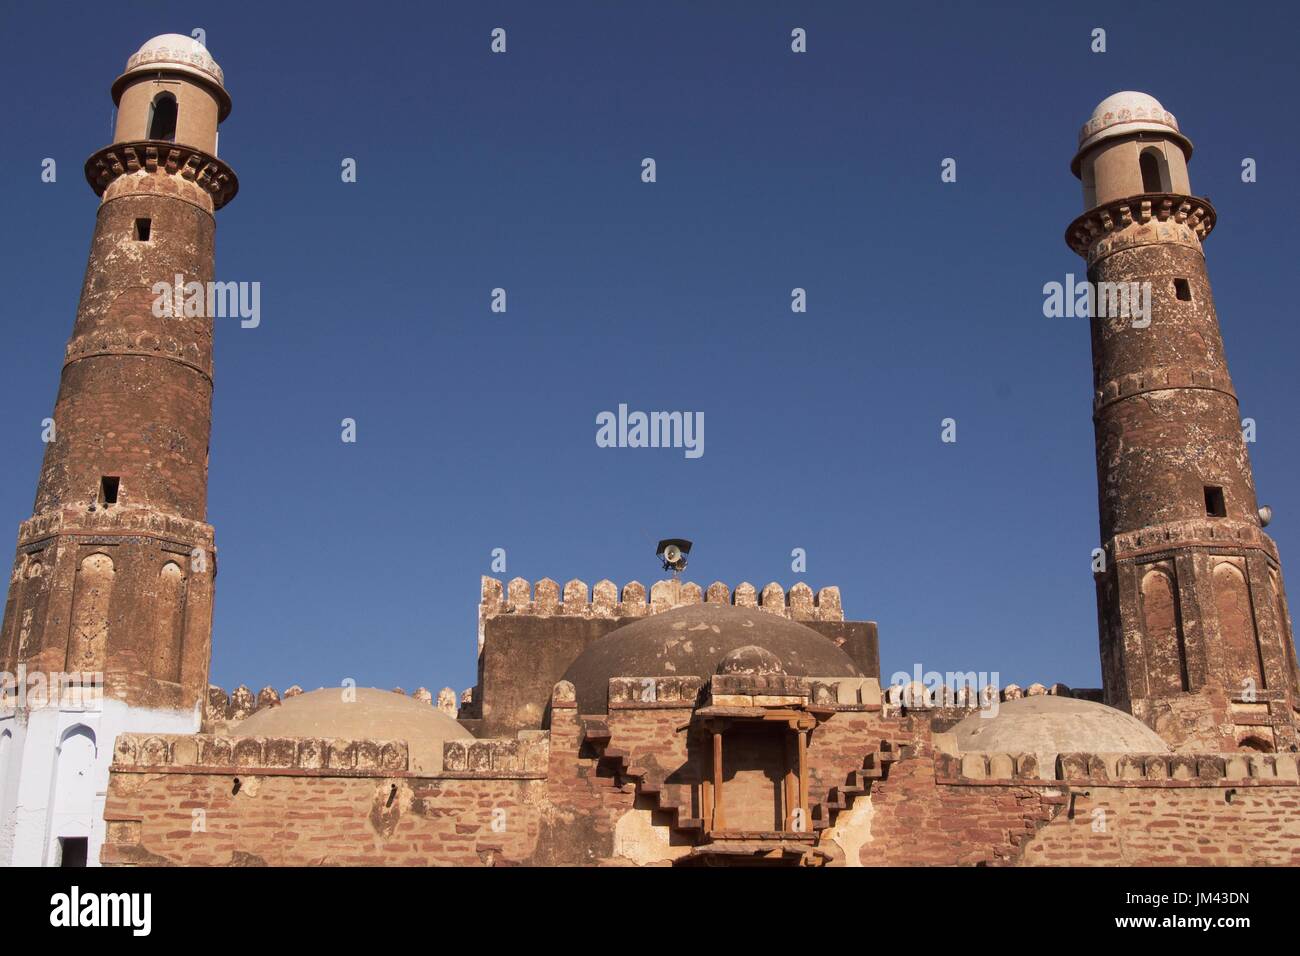 Minaret of the historic Jama Masjid Mosque in the desert city of Nagaur in Rajasthan, India. Stock Photo